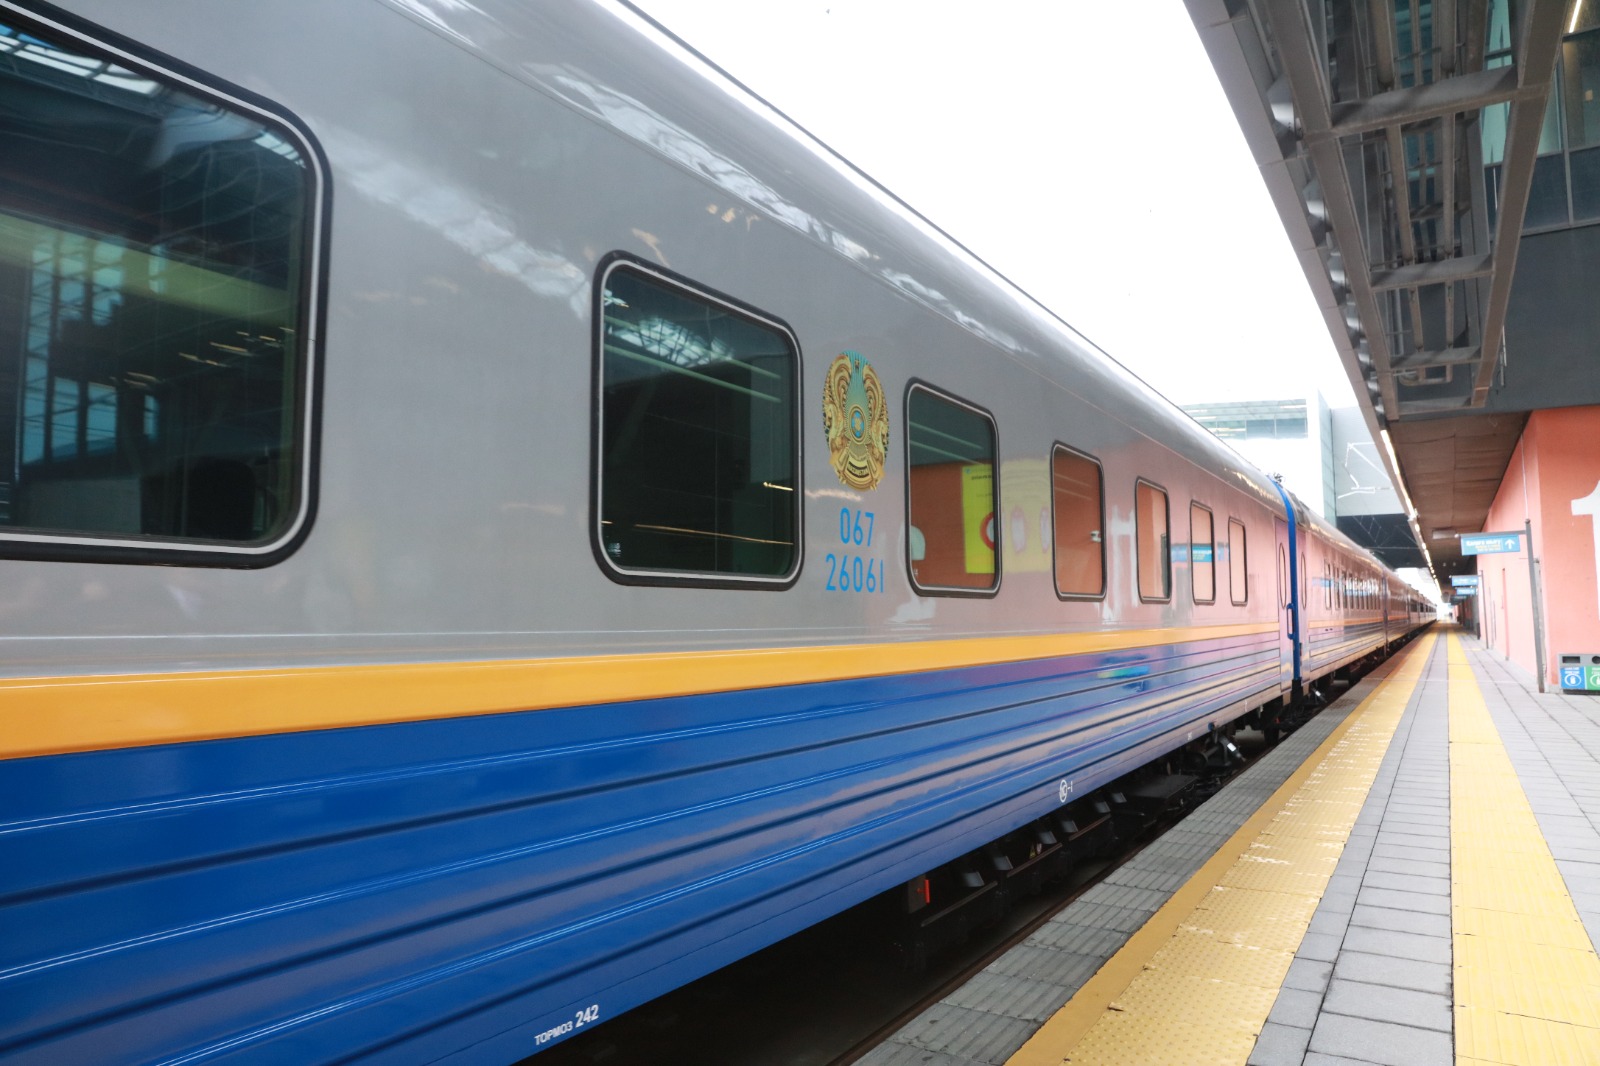 The first tourist train will arrive in Almaty from Xi'an on July 1